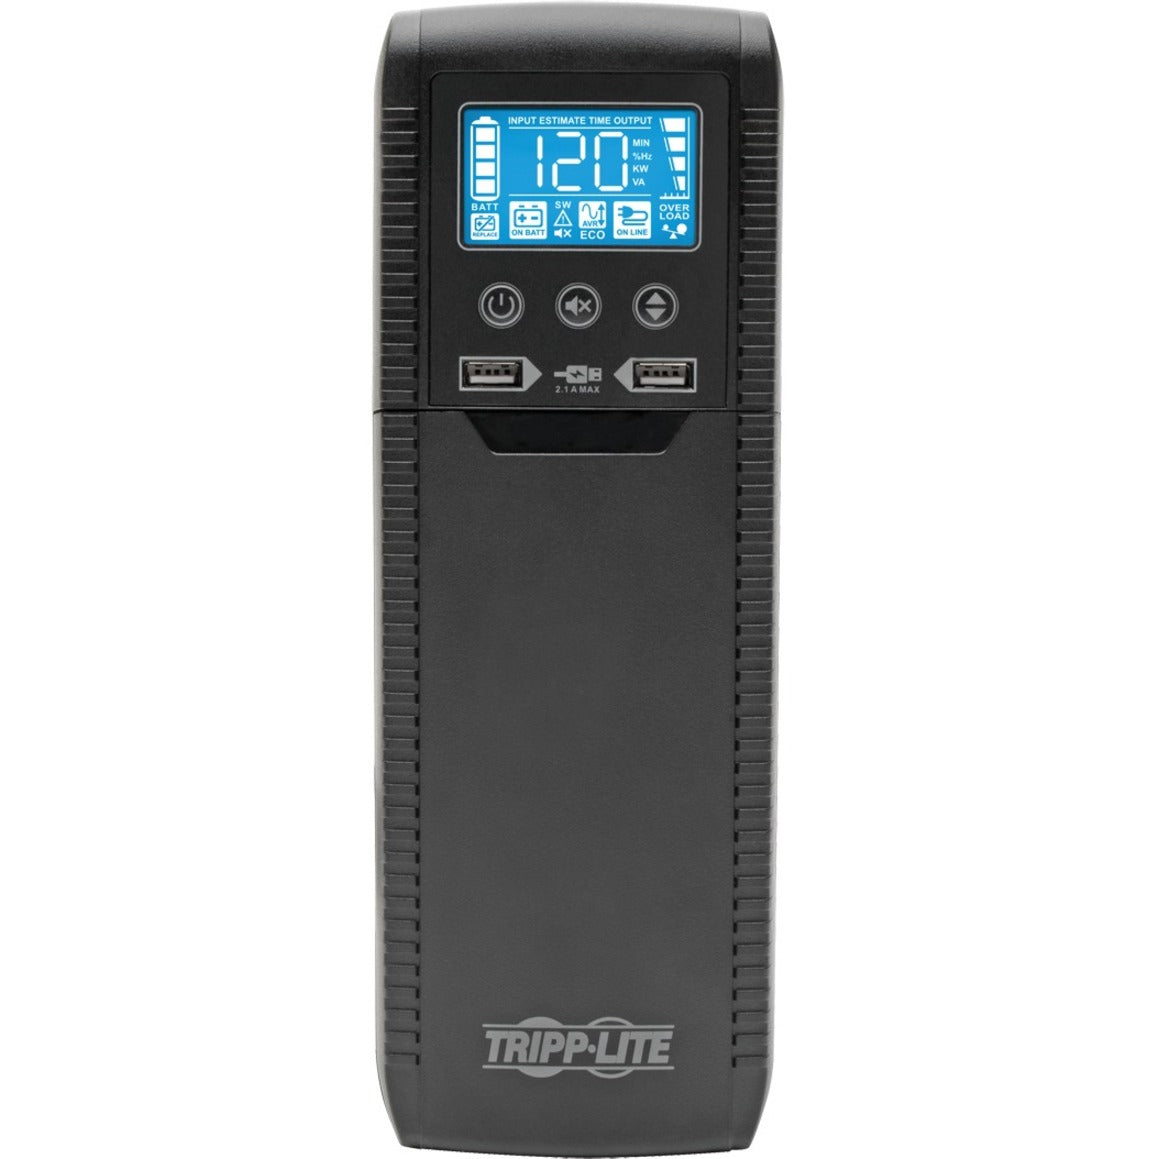 Tripp Lite Line Interactive UPS with USB and 10 Outlets - 120V 1440VA 900W 50/60 Hz AVR ECO Series ENERGY STAR